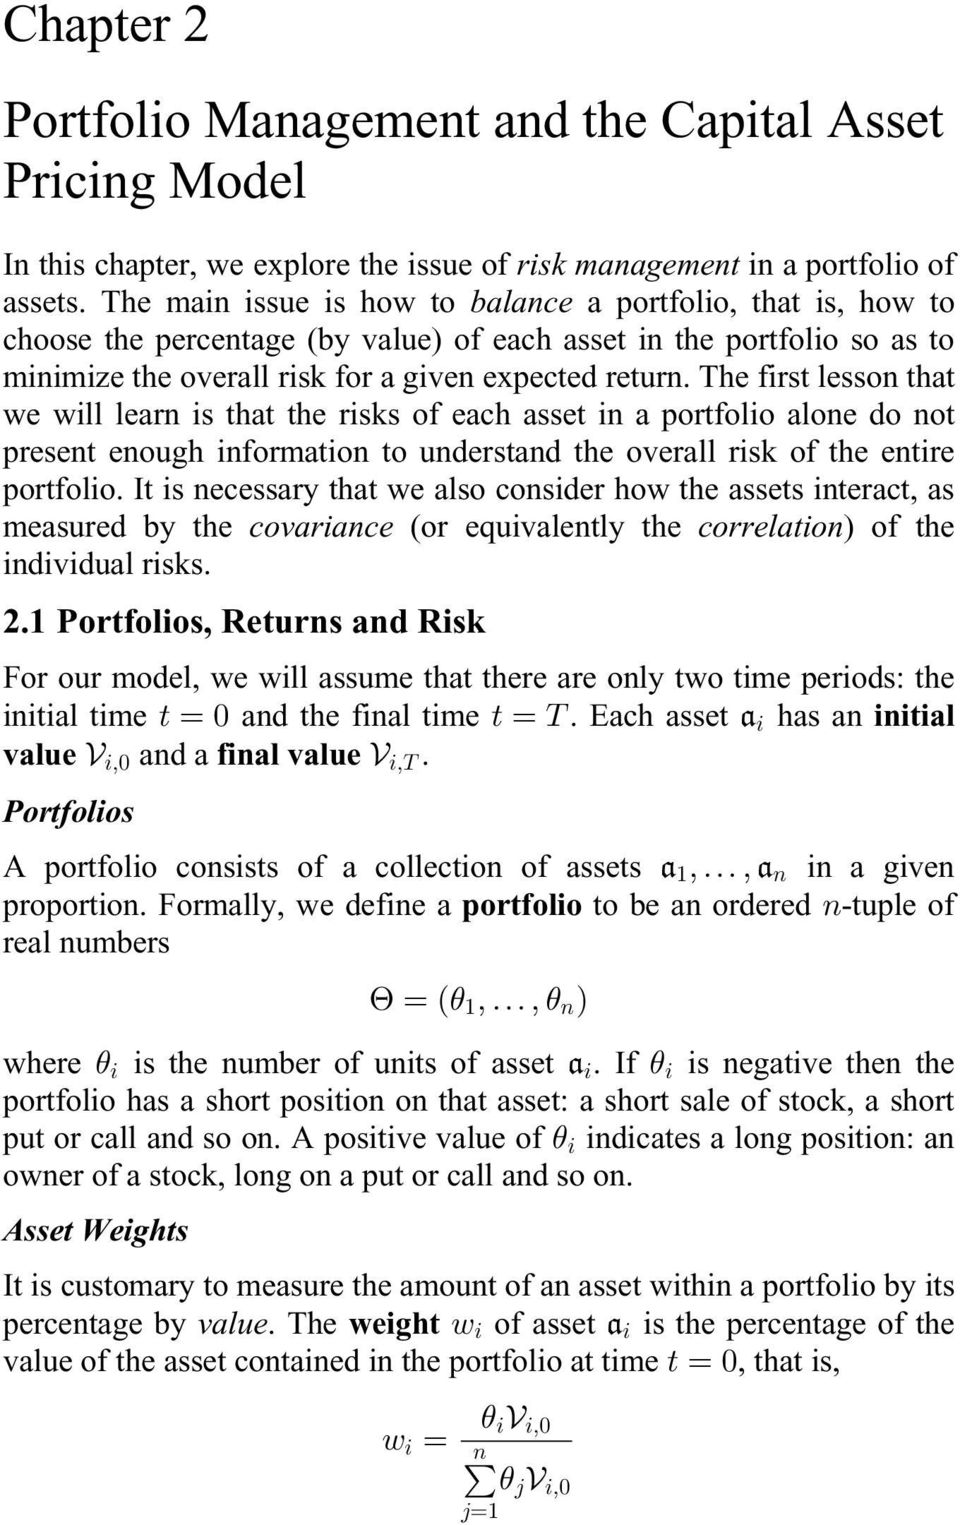 The first lesson that we will learn is that the risks of each asset in a portfolio alone do not present enough information to understand the overall risk of the entire portfolio.